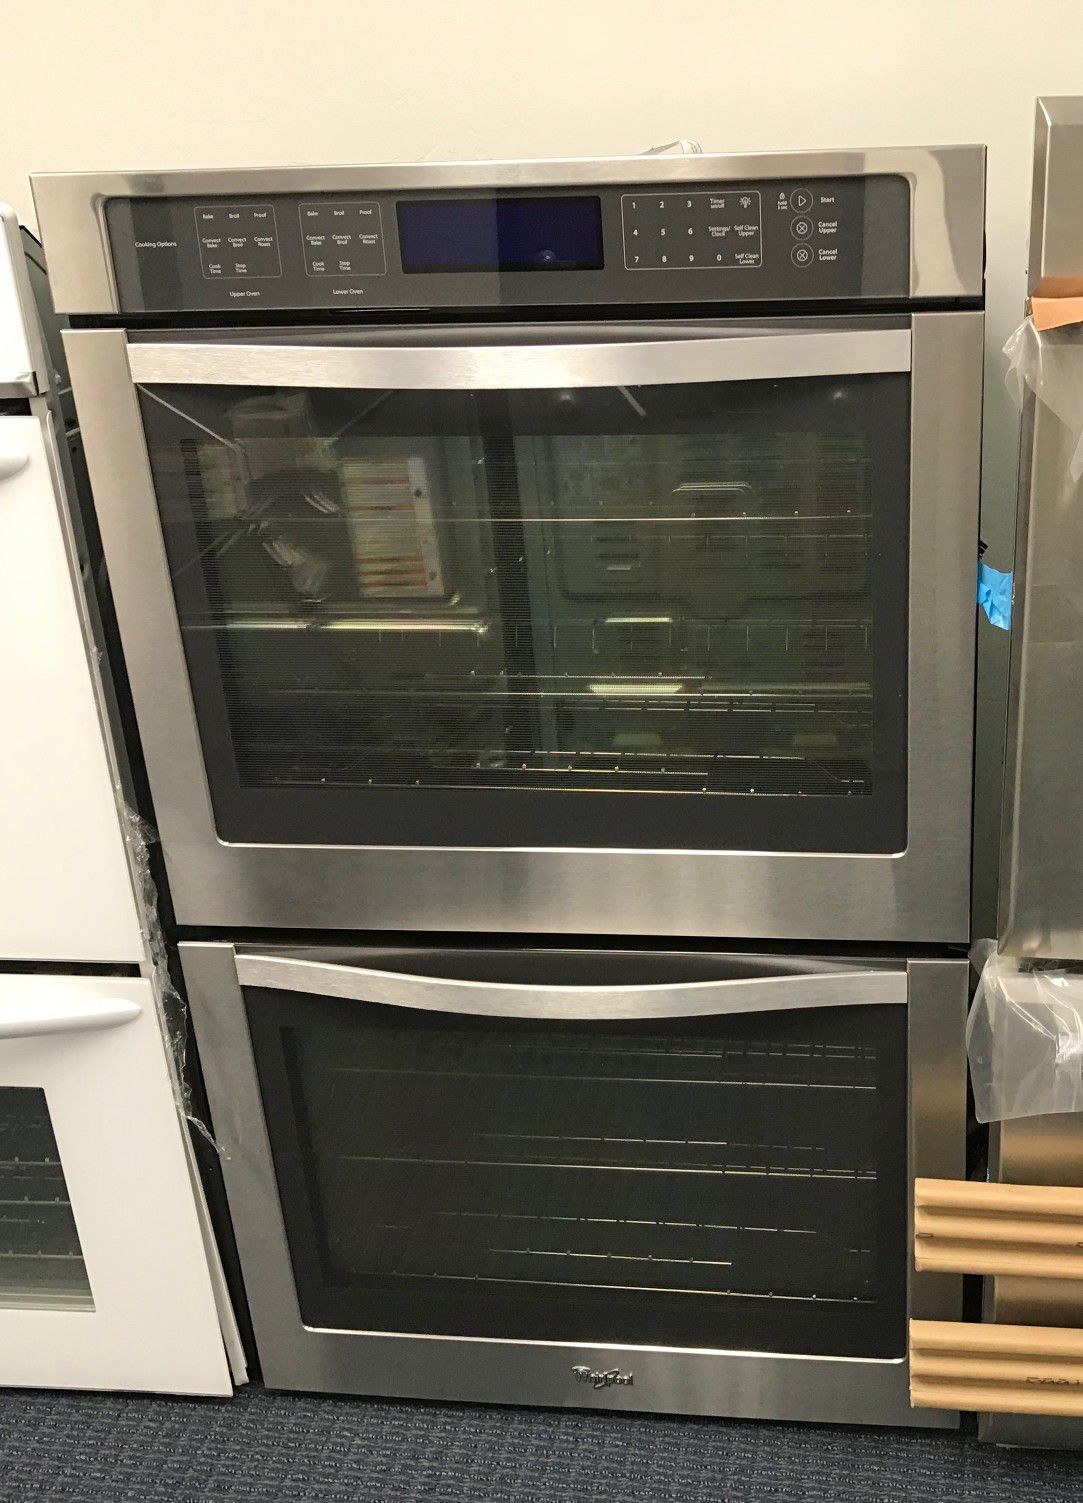 Brand New Whirlpool Double Oven